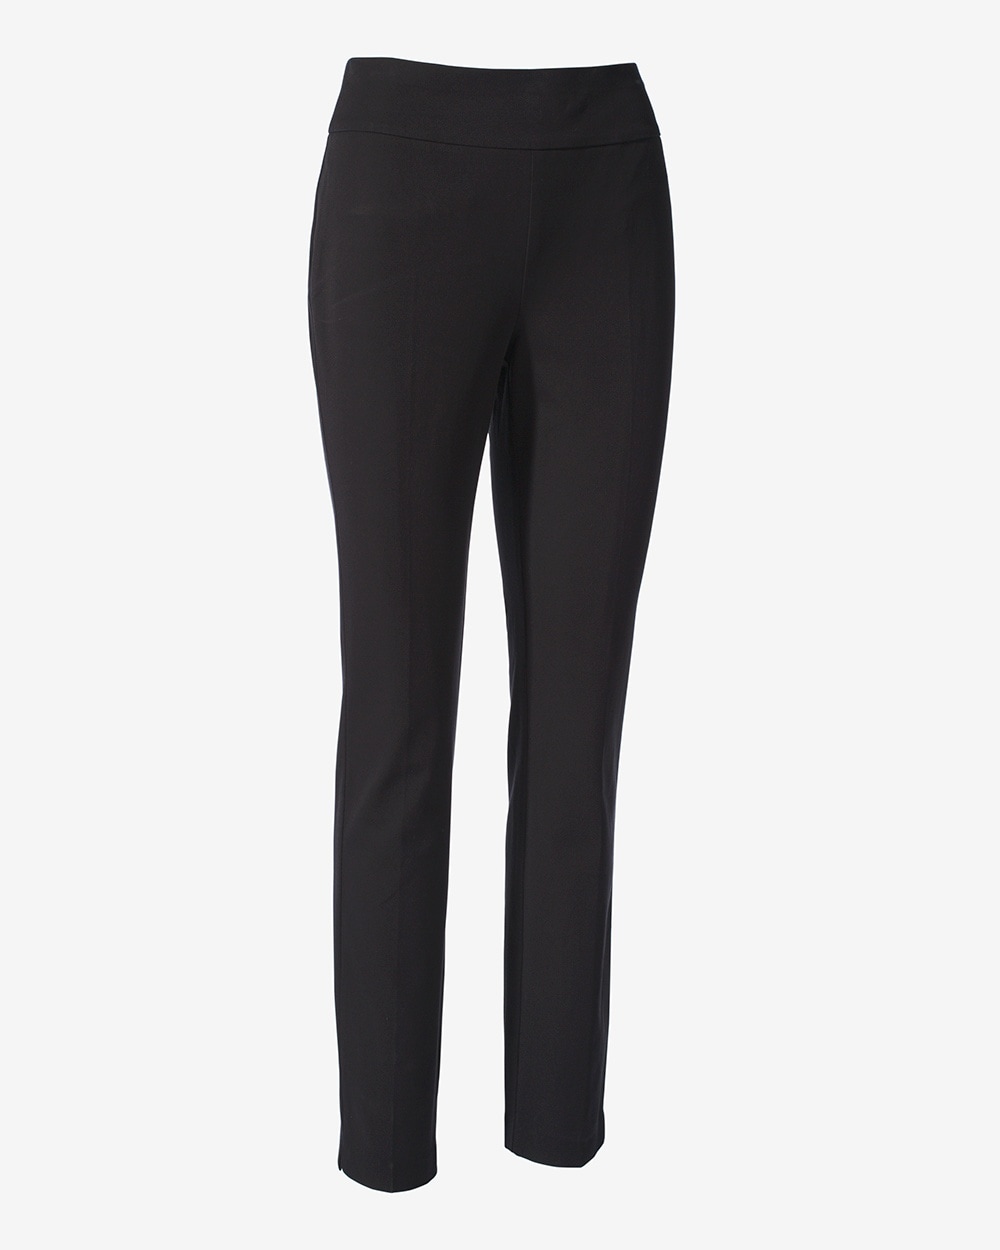 Fabulously Slimming 4-Way Stretch Ankle Pants